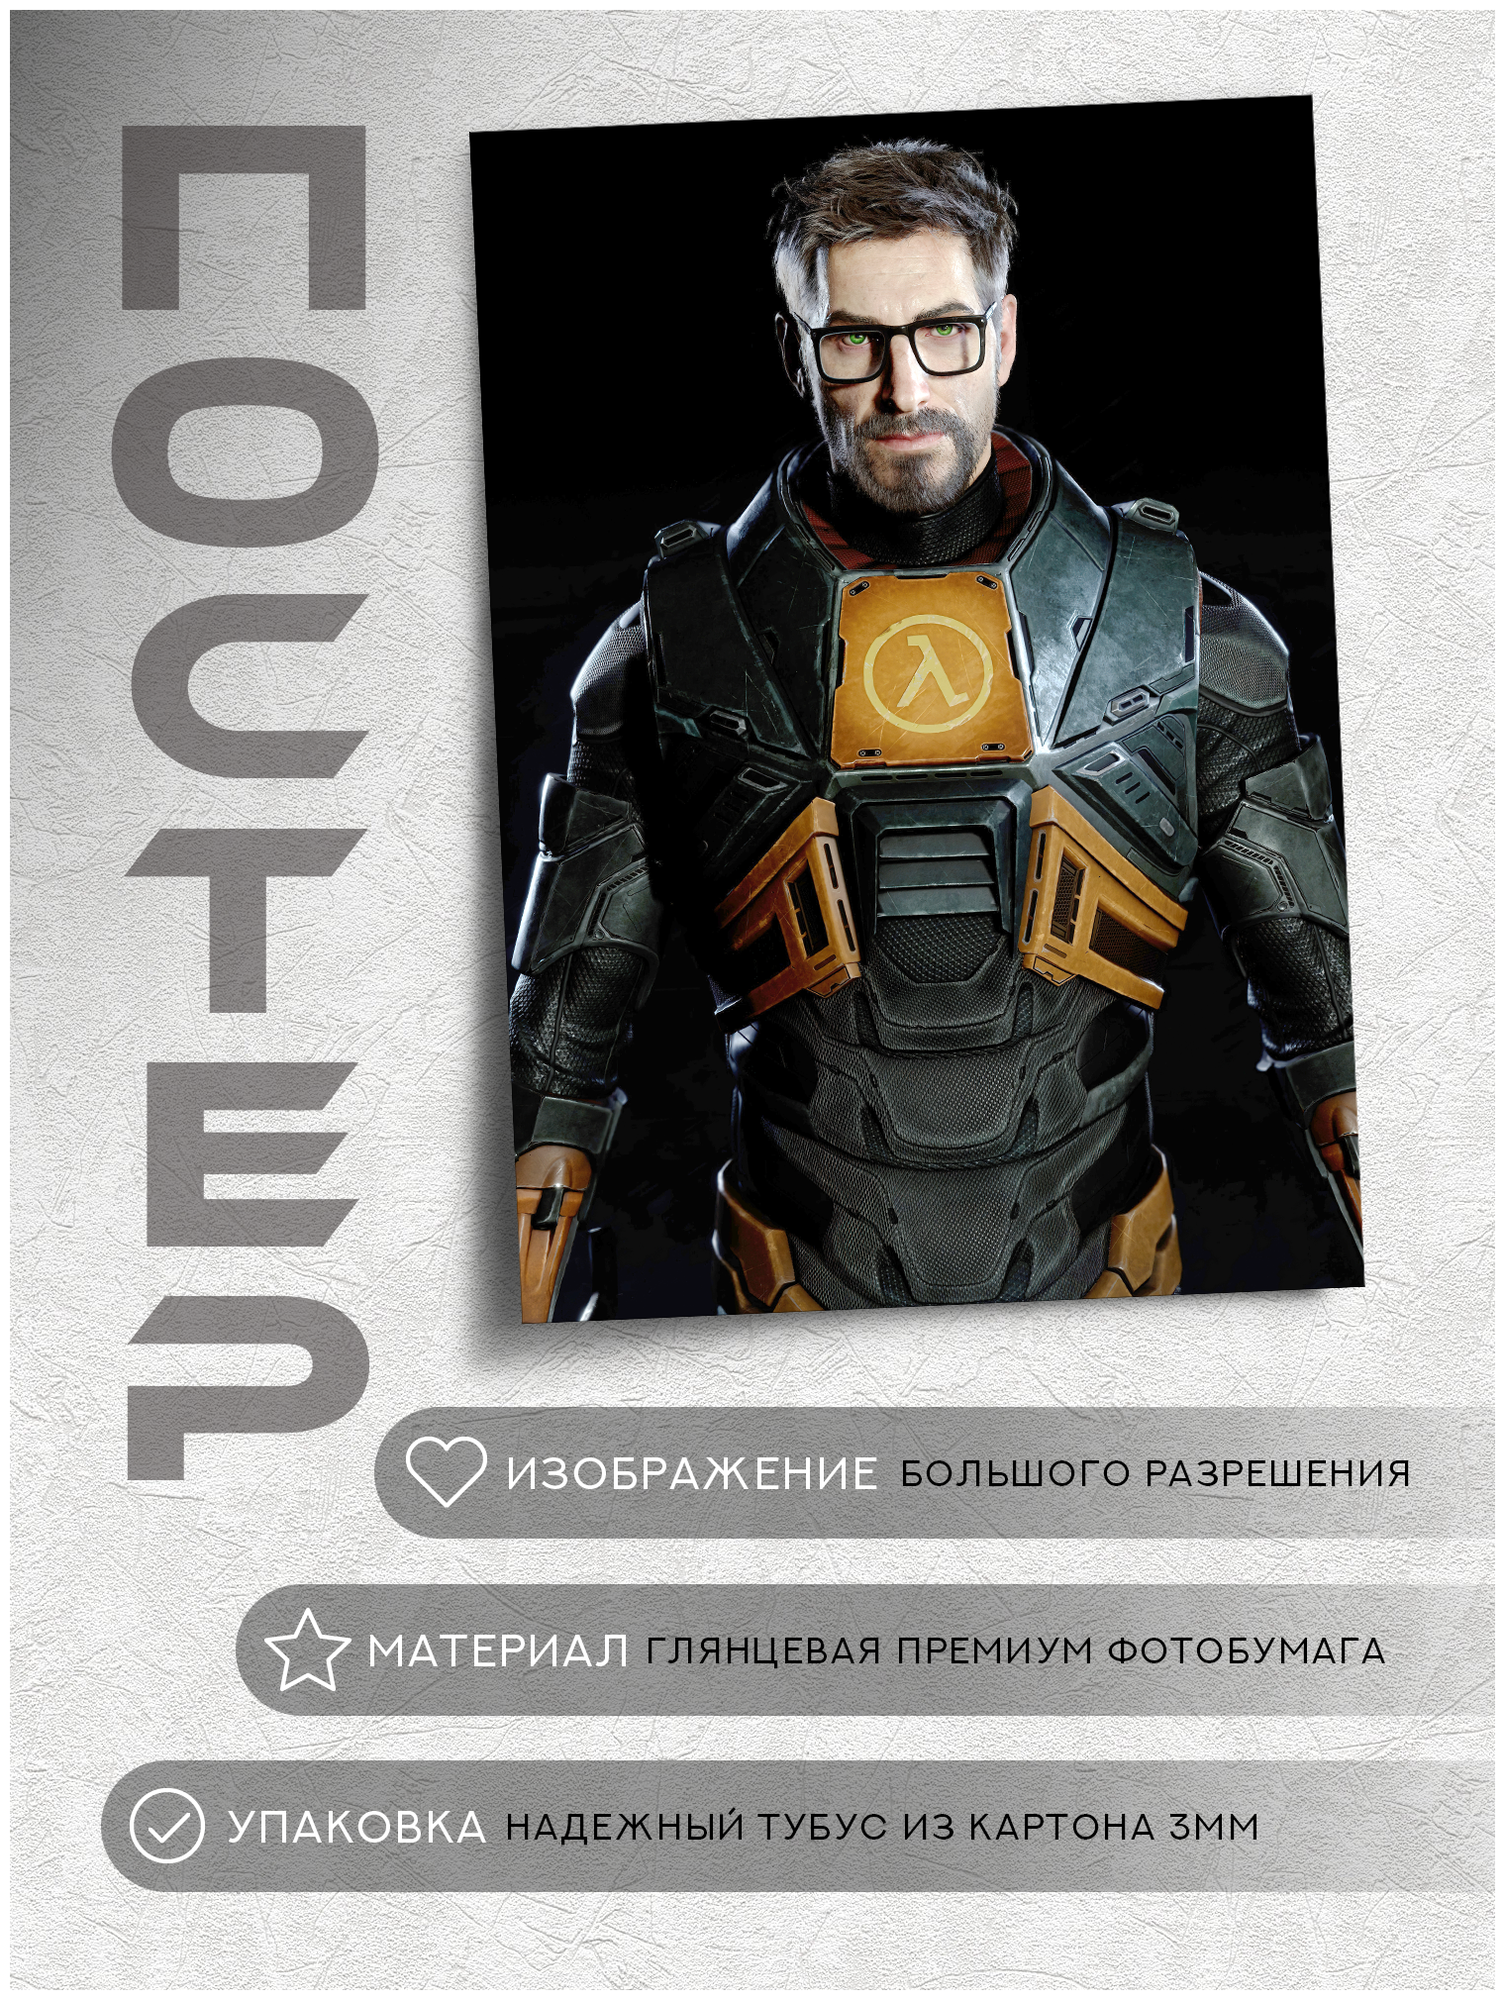 Download failed because you may not have purchased this app half life фото 36